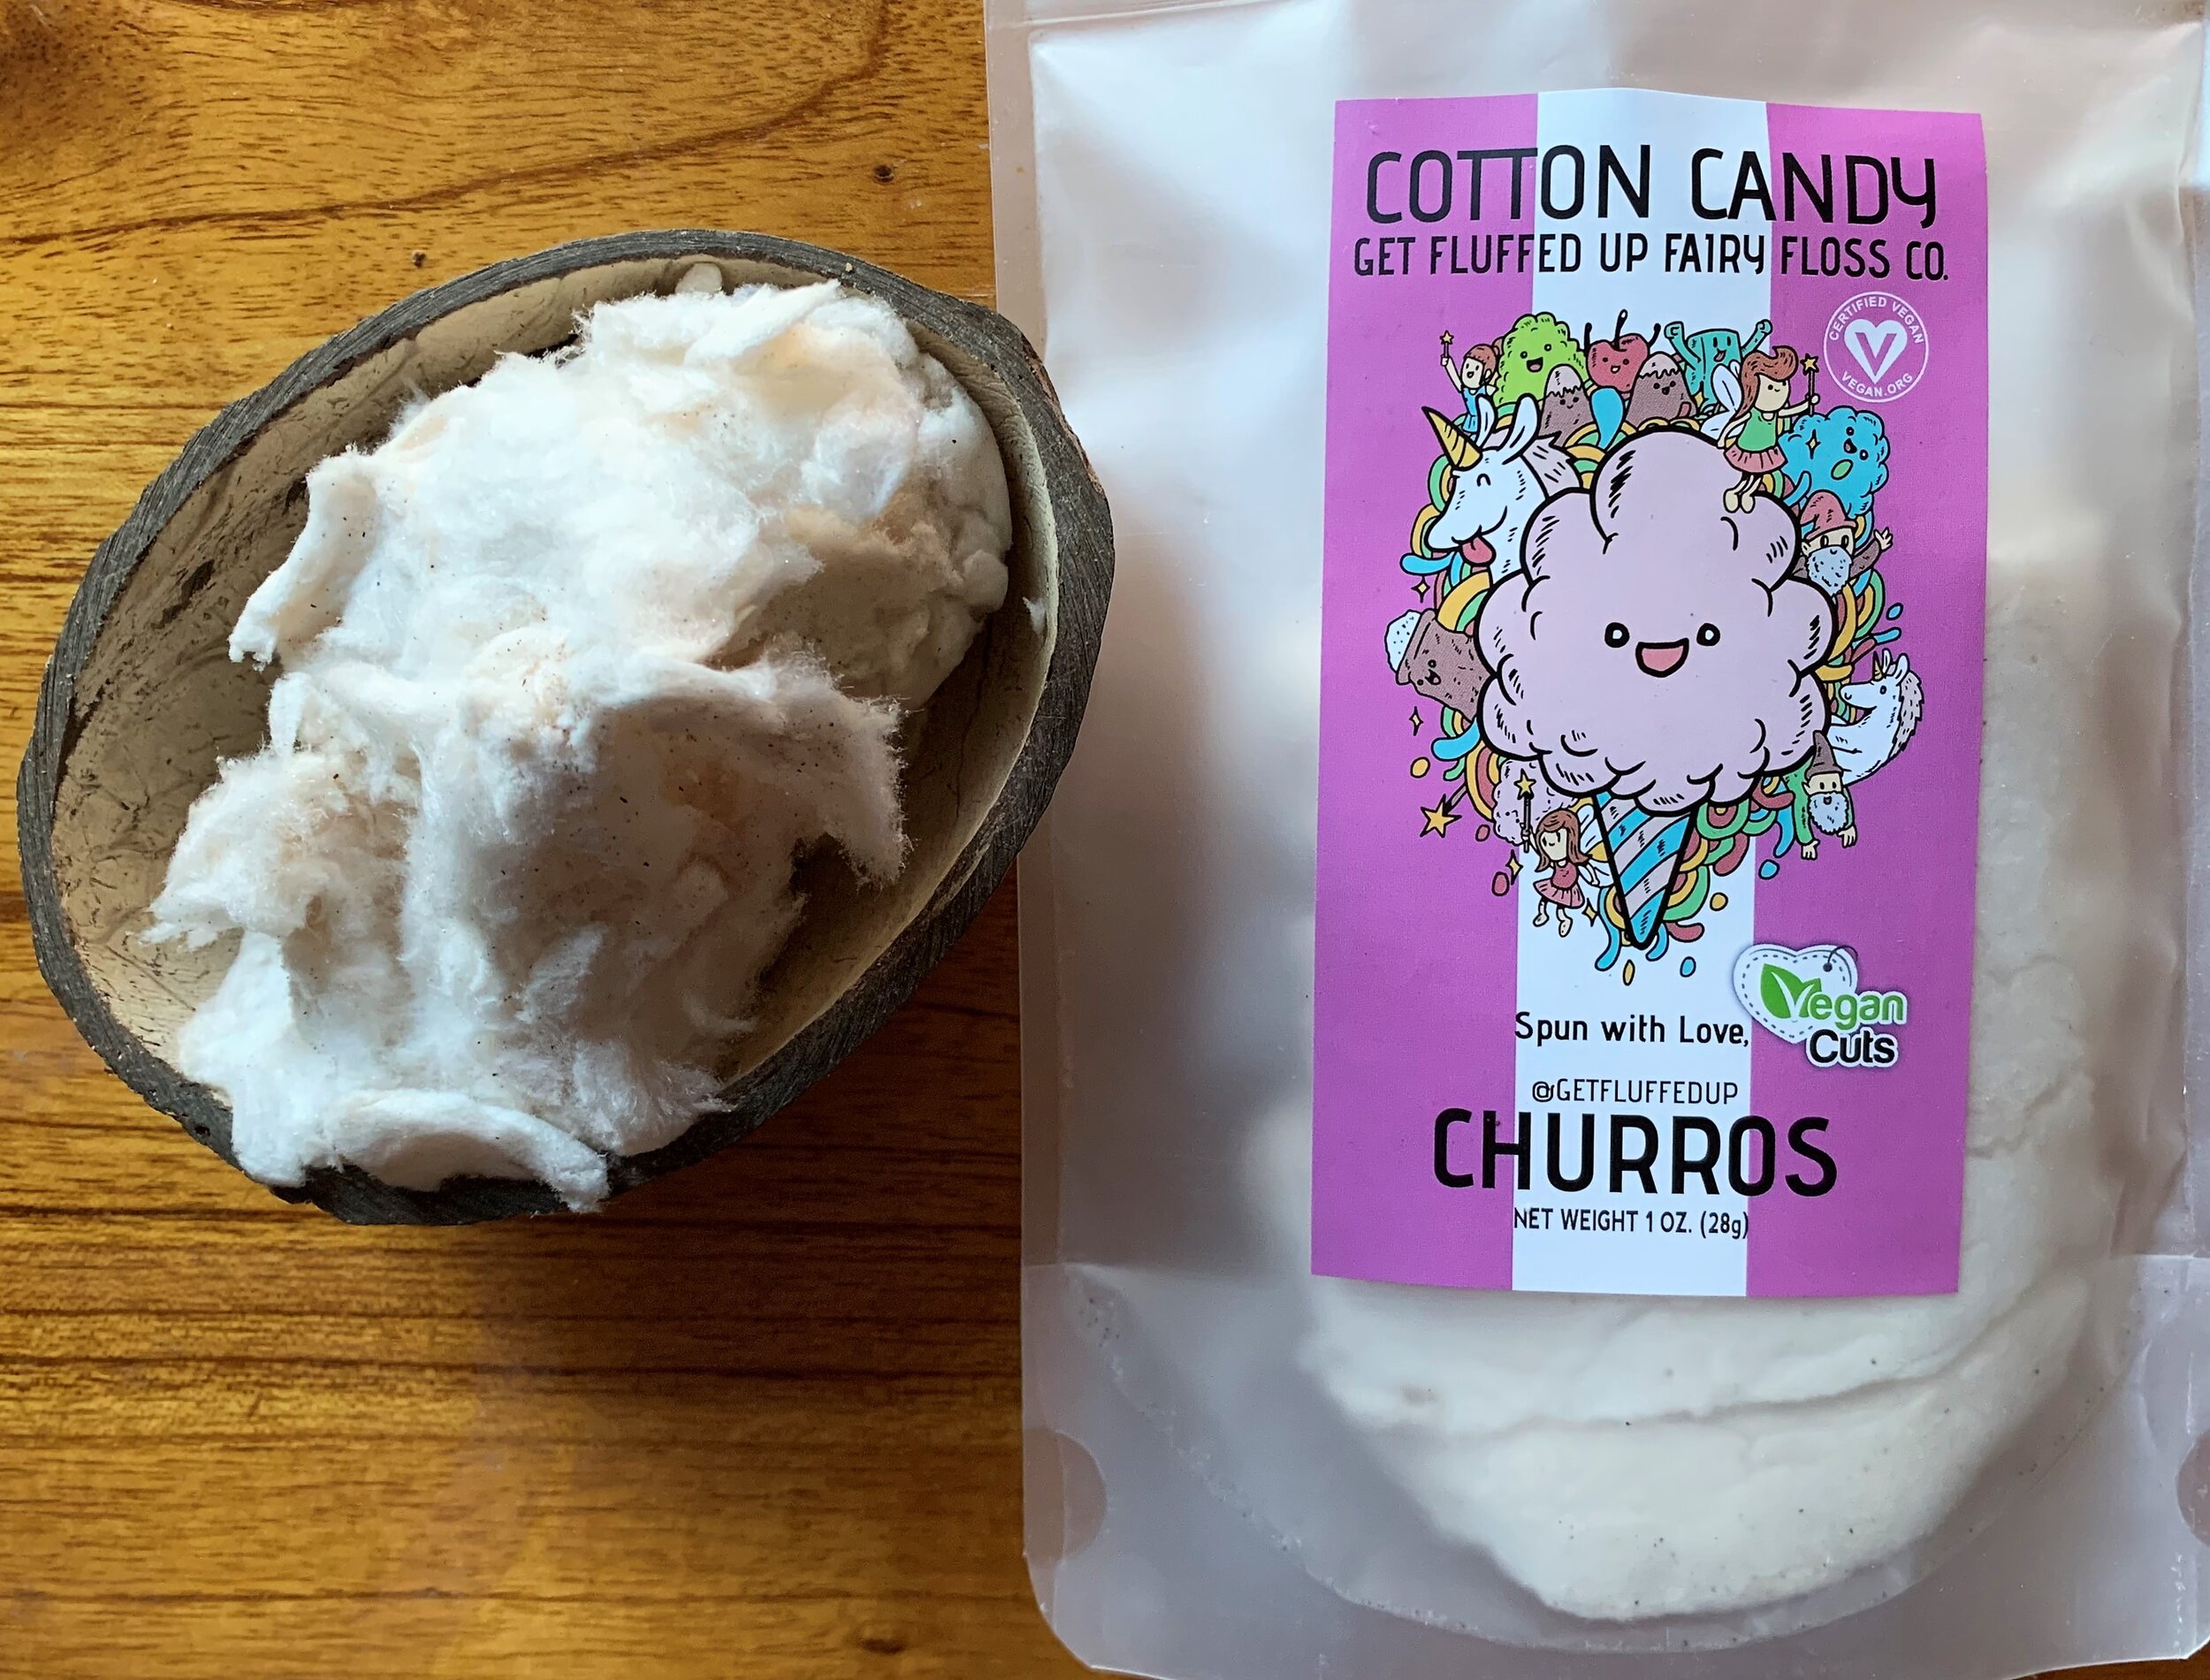 Churros flavored cotton candy from Get Fluffed Up